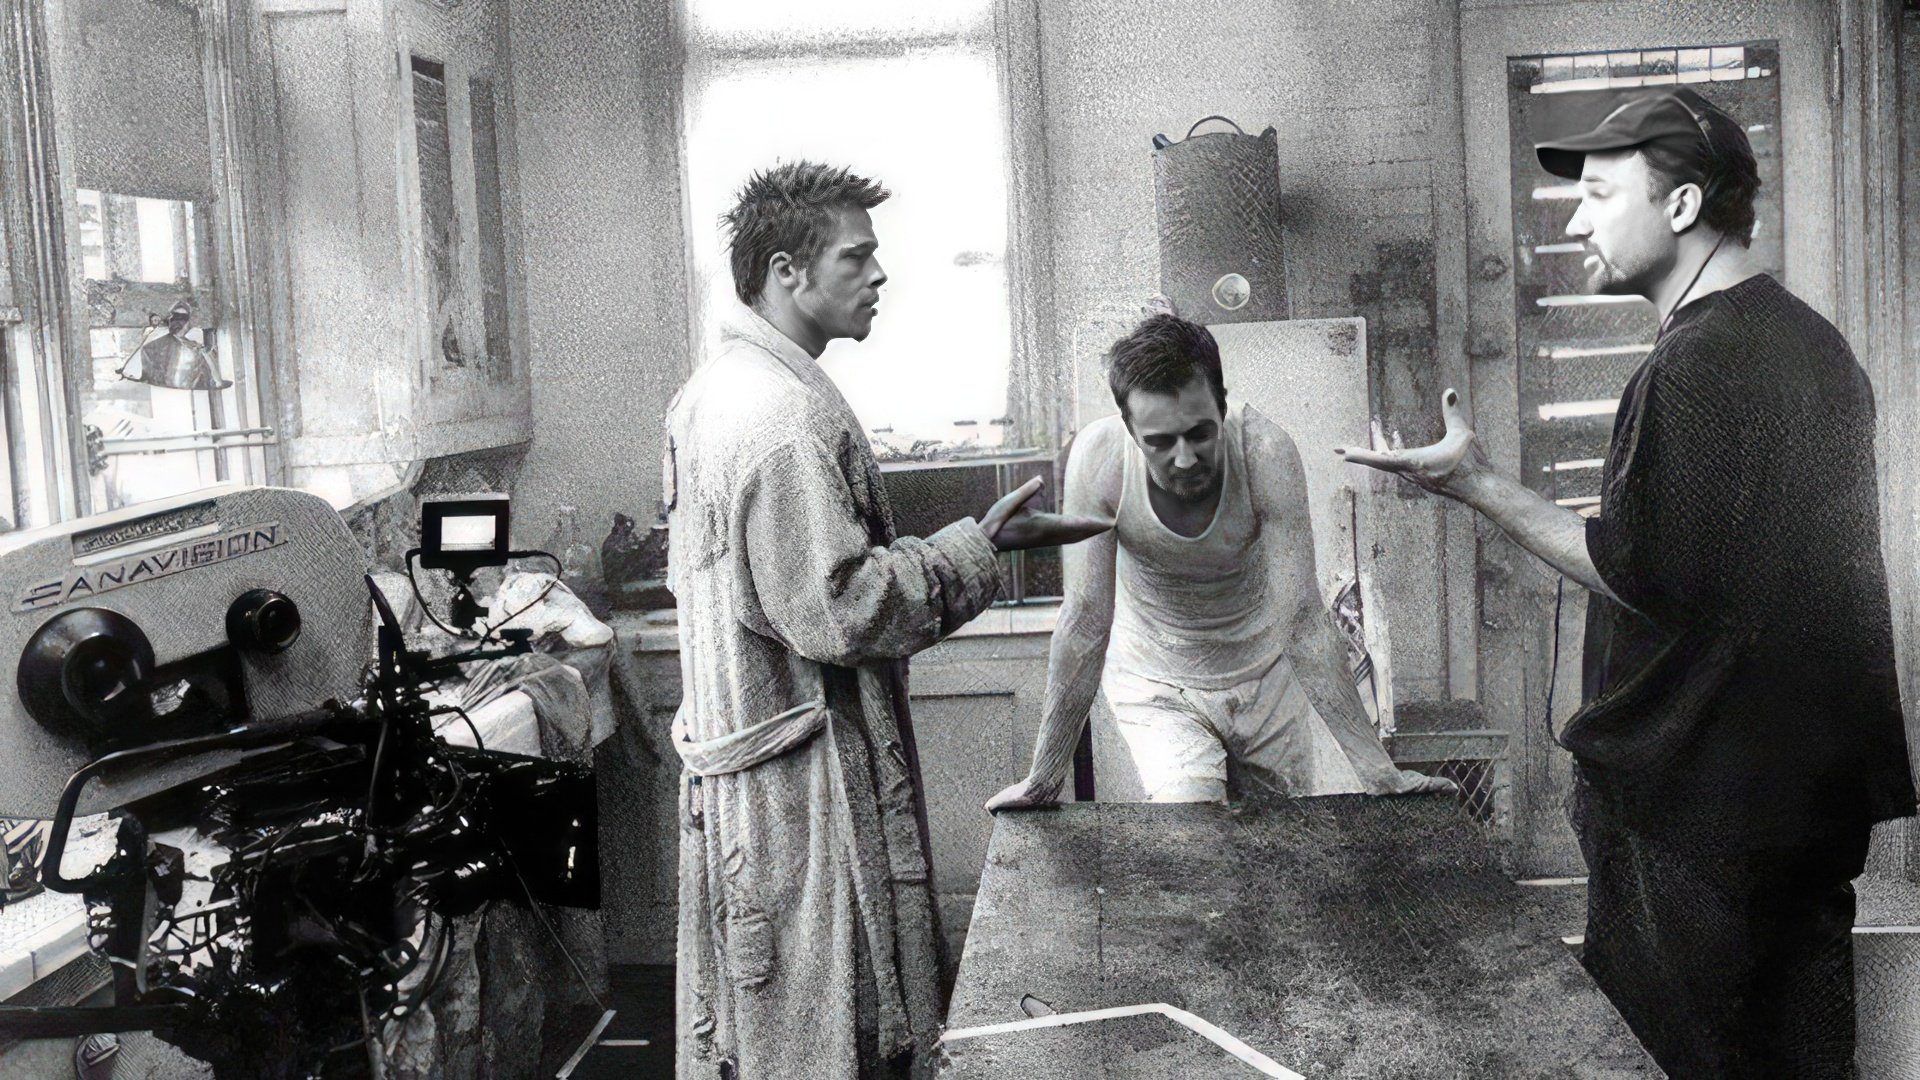 On the set of the movie Fight Club